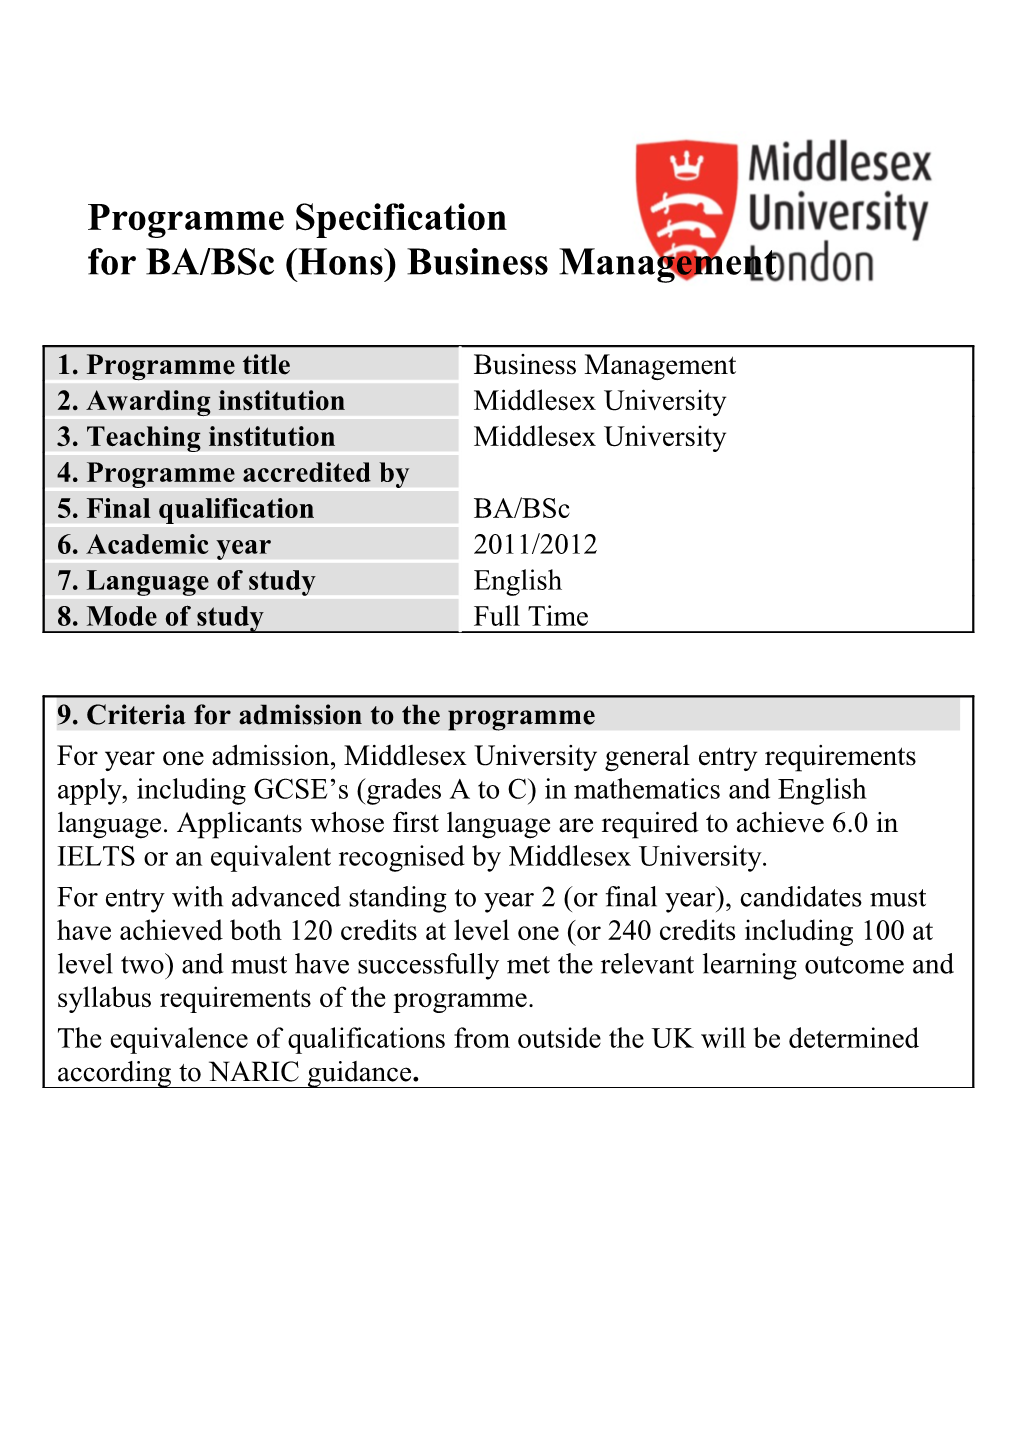 Programme Specification Forba/Bsc (Hons) Business Management